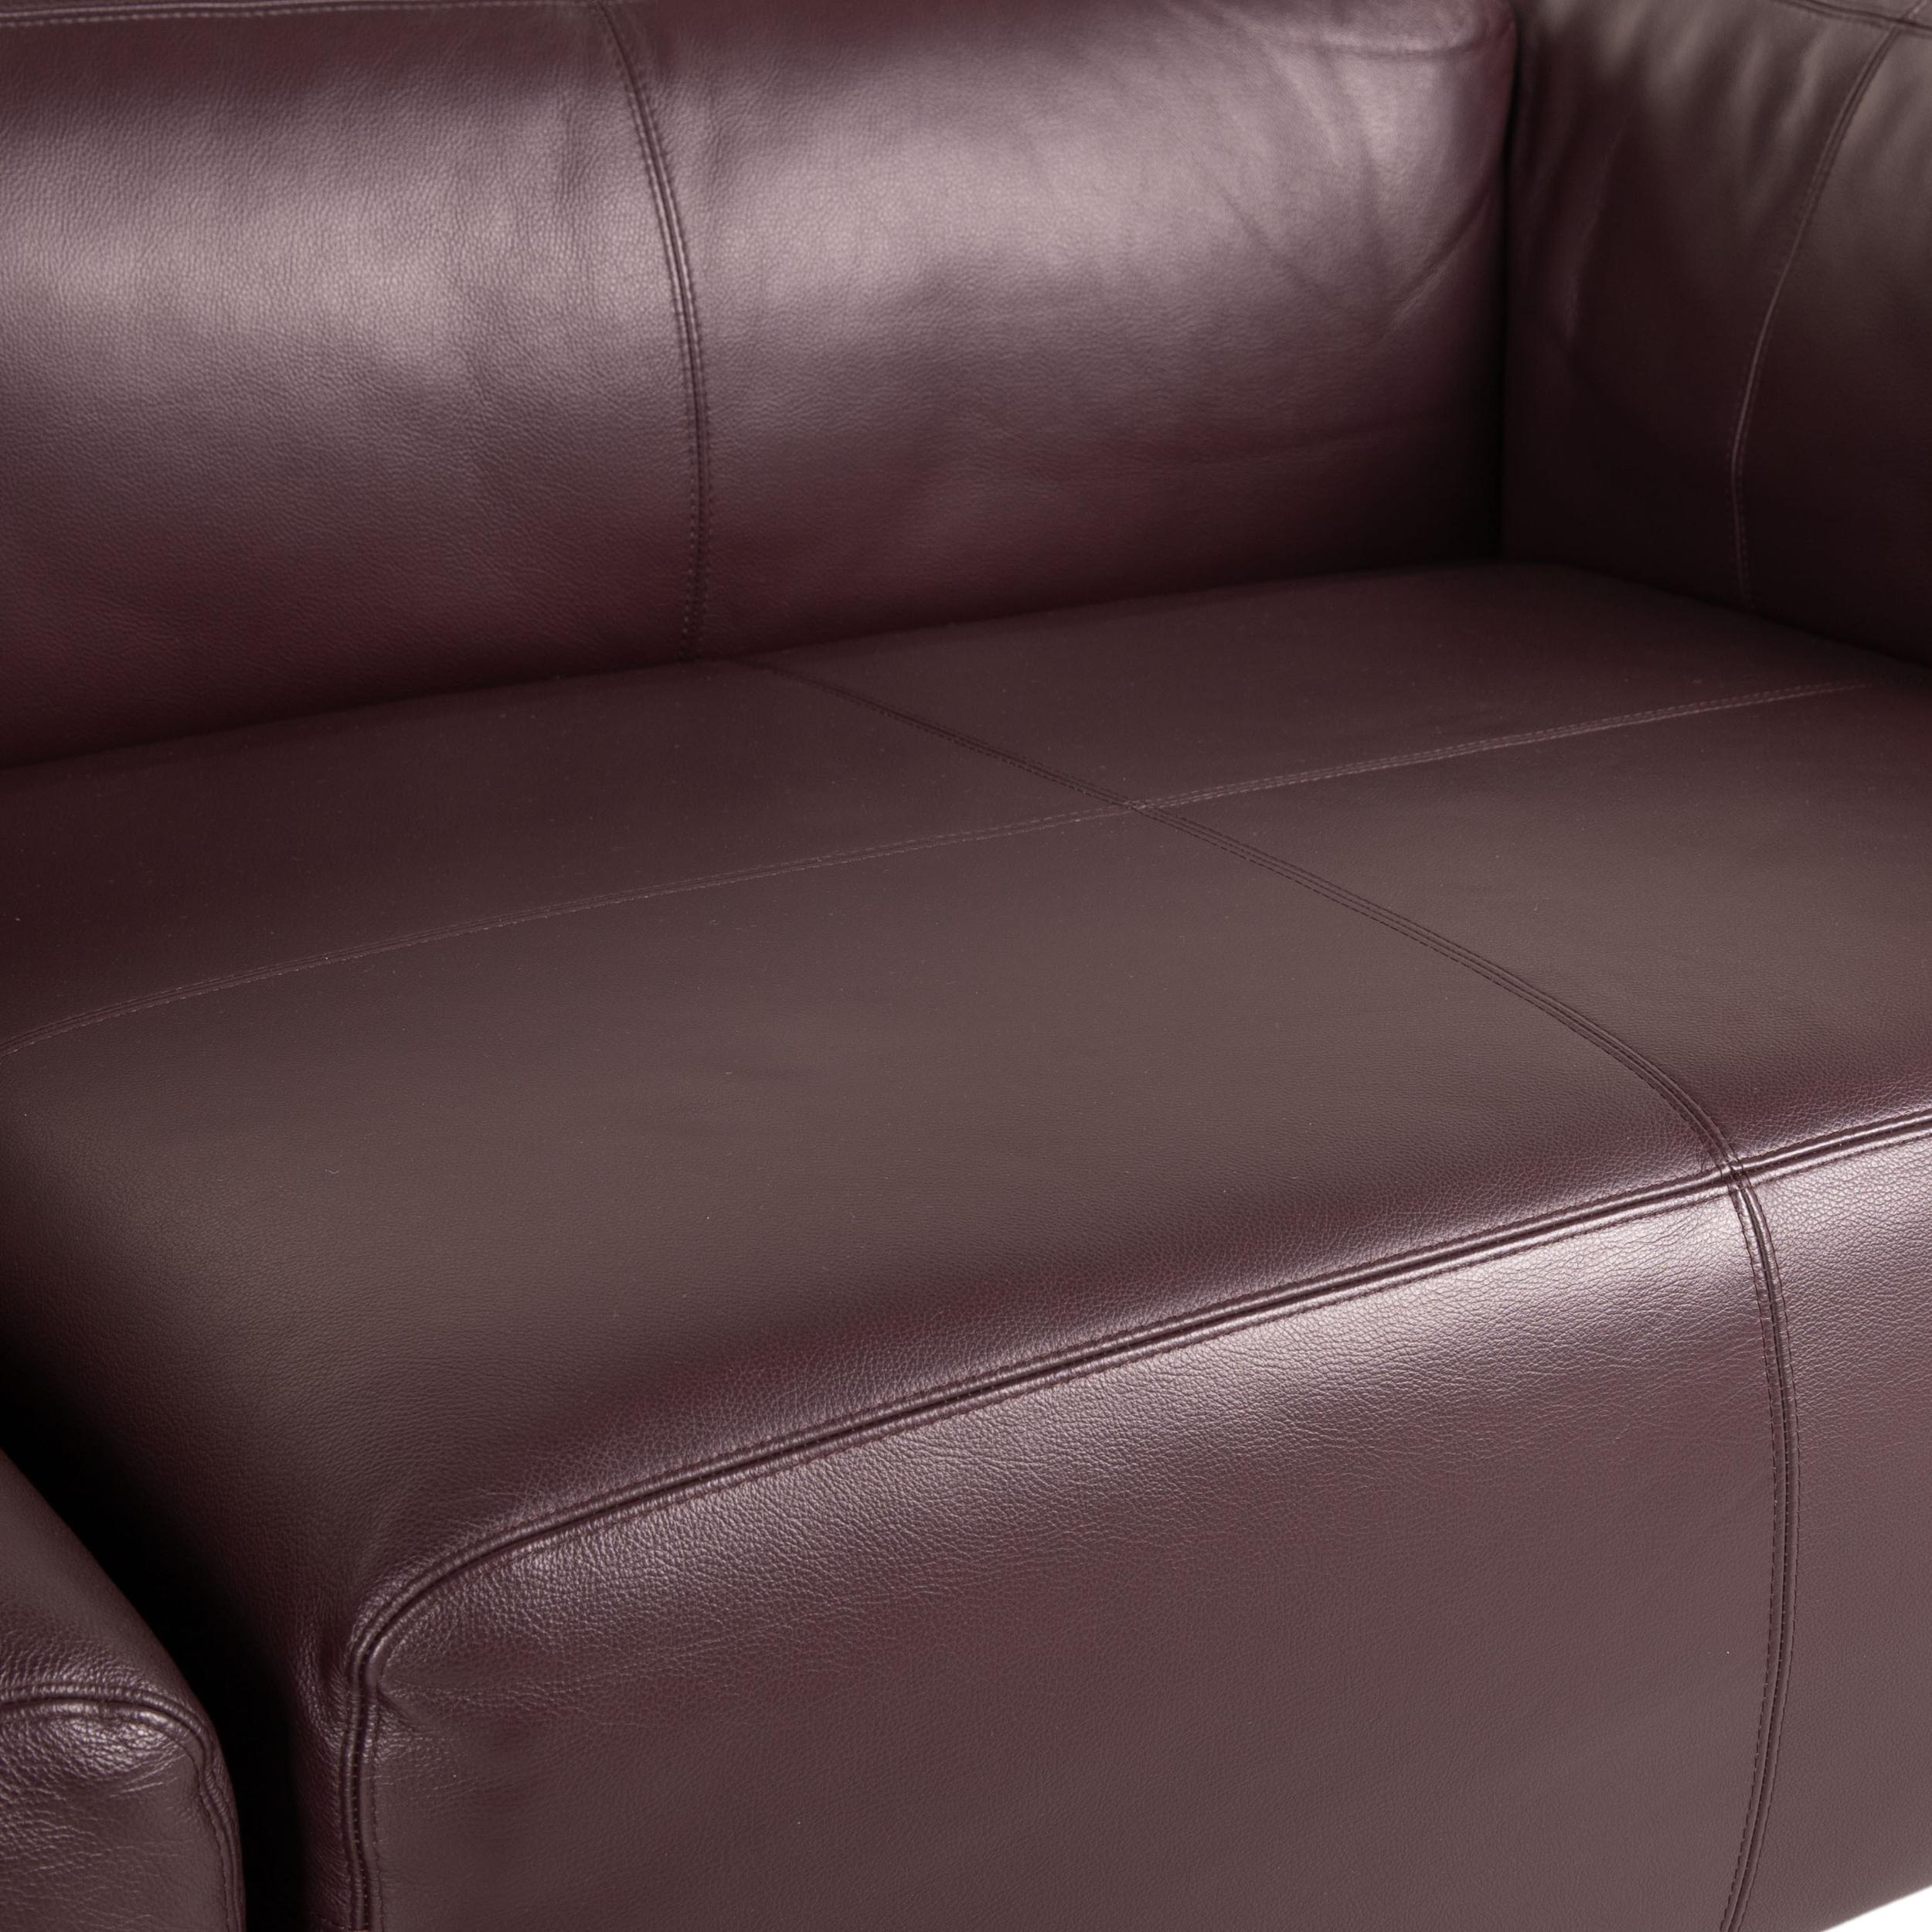 purple leather couch for sale